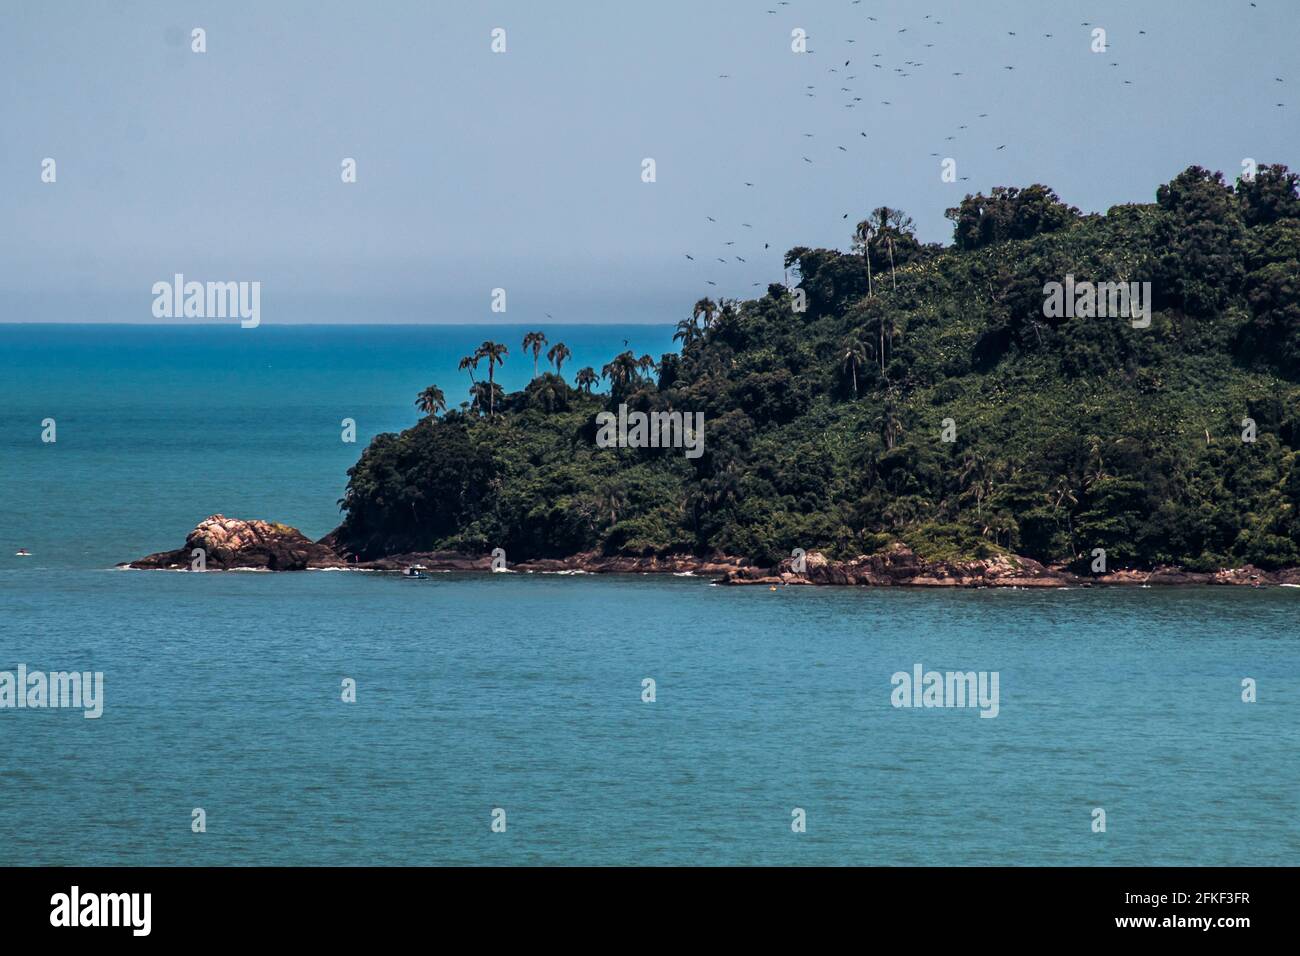 Far away tropical island with dozens of birds flying over it Stock Photo